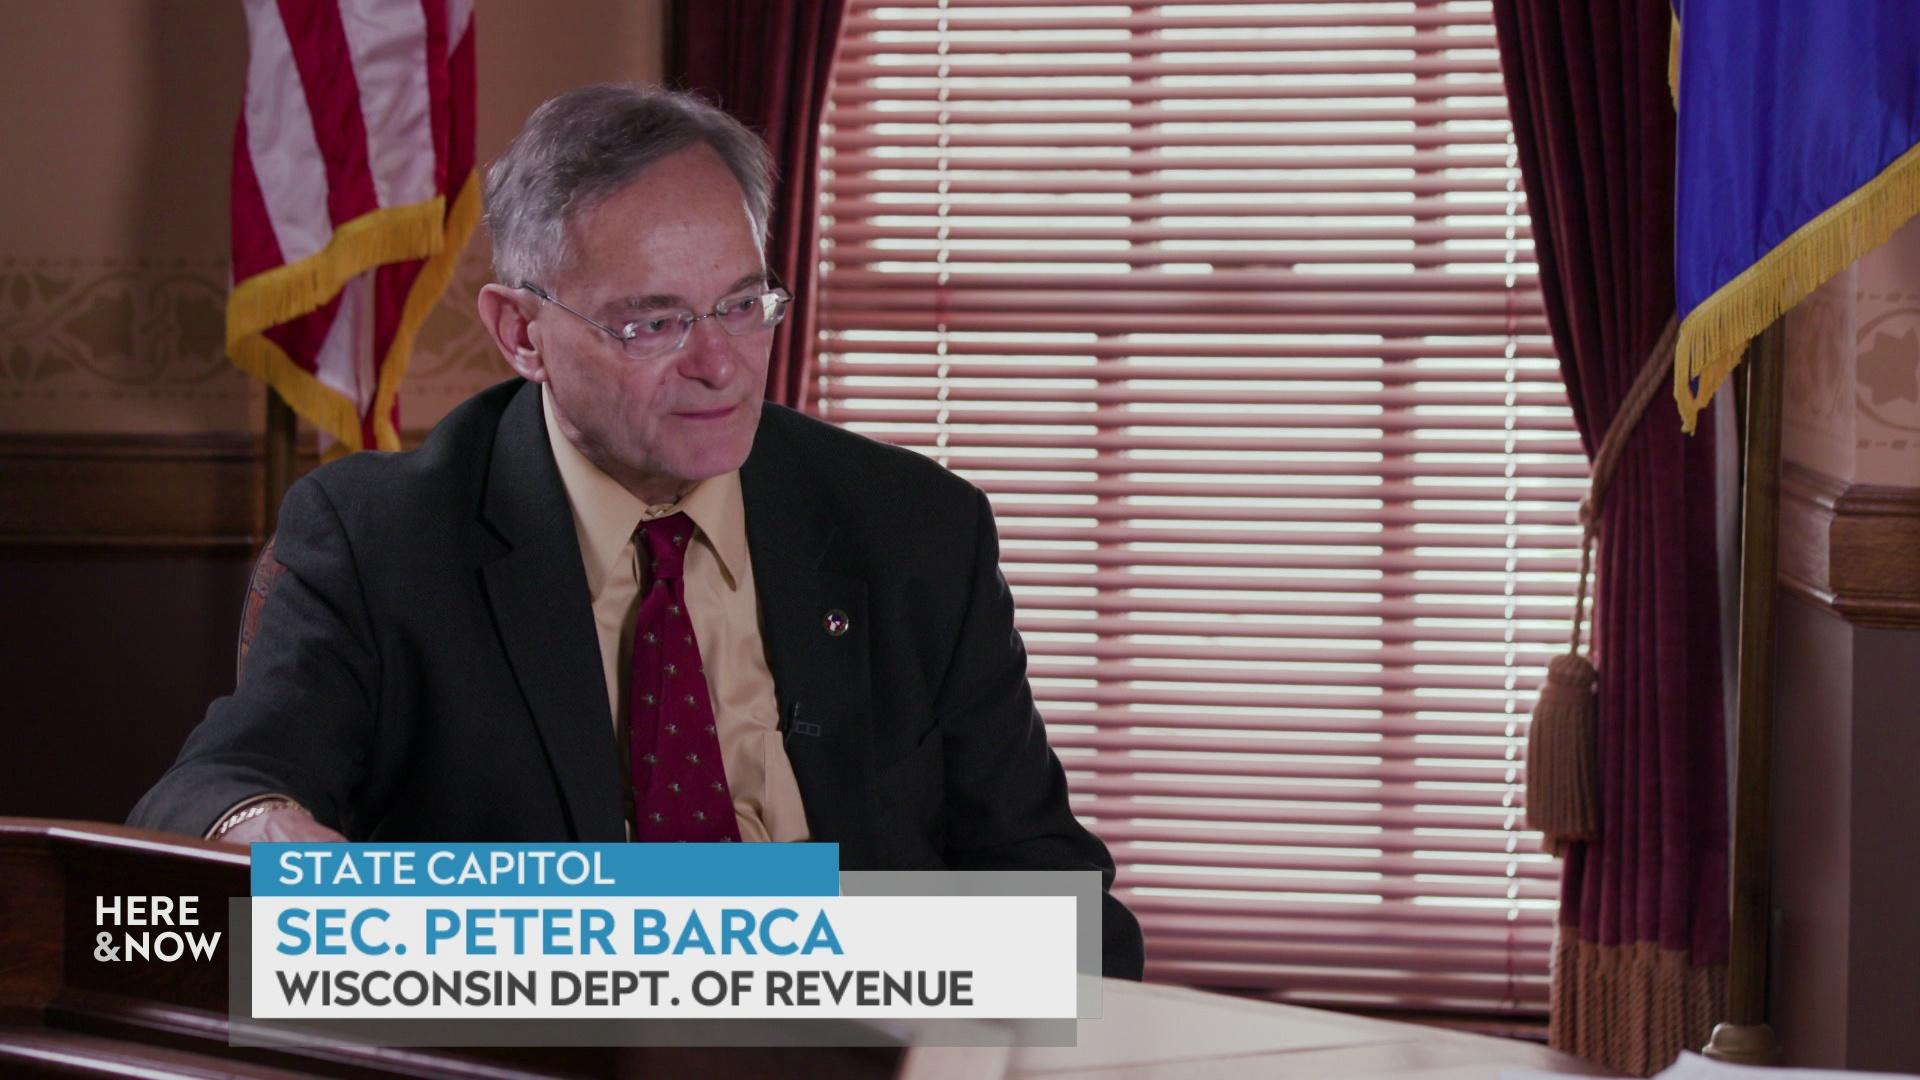 A still image from a video shows Peter Barca seated in front of a window with a U.S. flag to the left and a Wisconsin state flag to the right with a graphic at bottom reading 'Sec. Peter Barca' and 'Wisconsin Department of Revenue.'